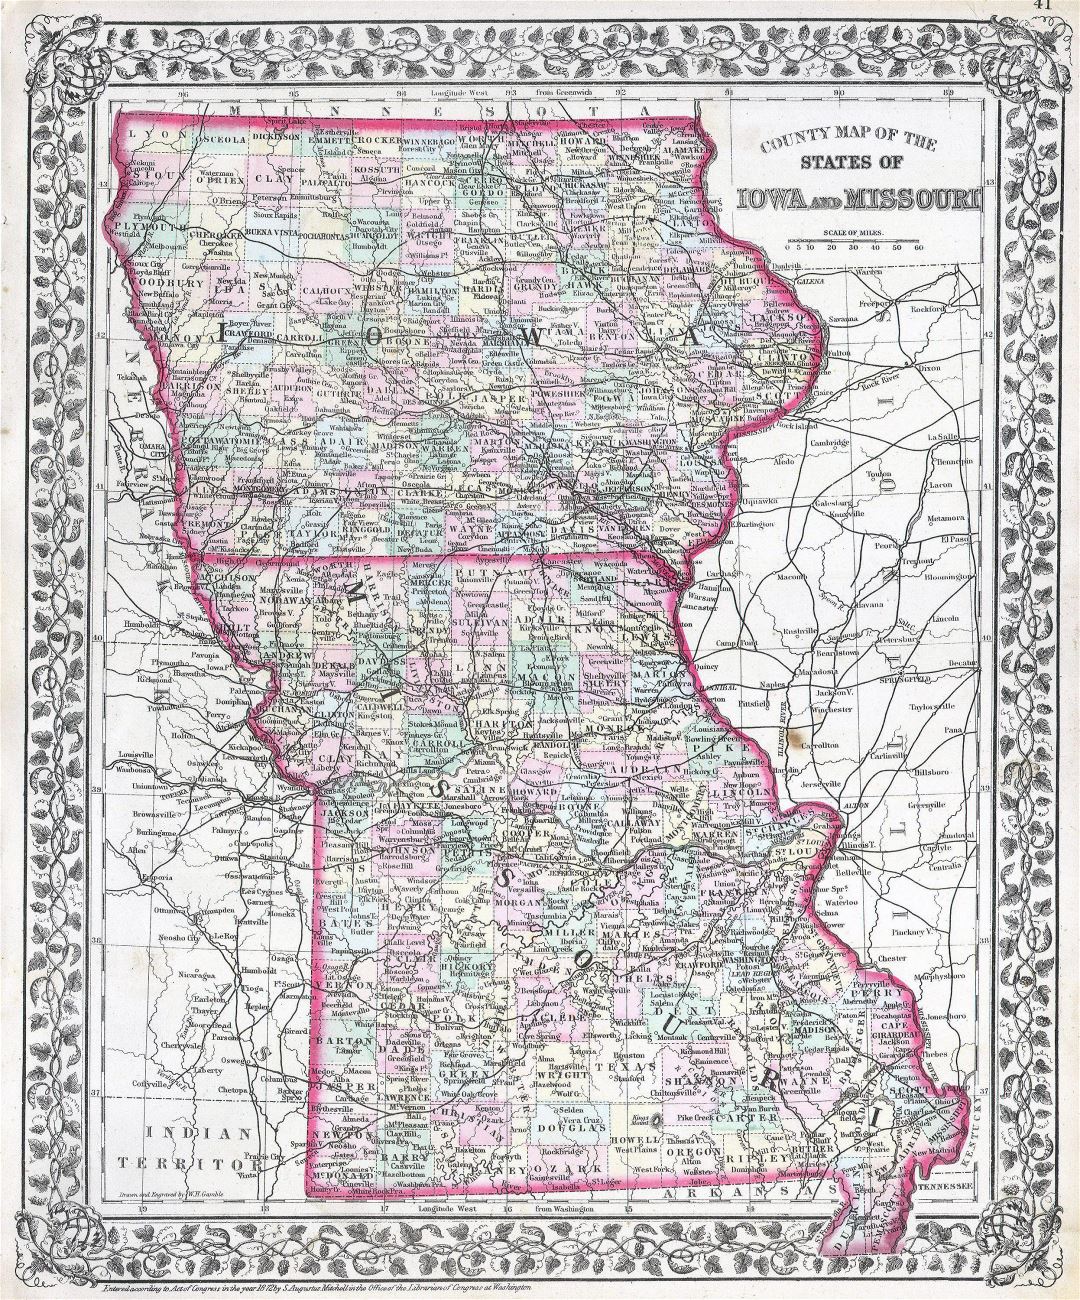 Large detailed old administrative map of Iowa and Missouri states - 1874